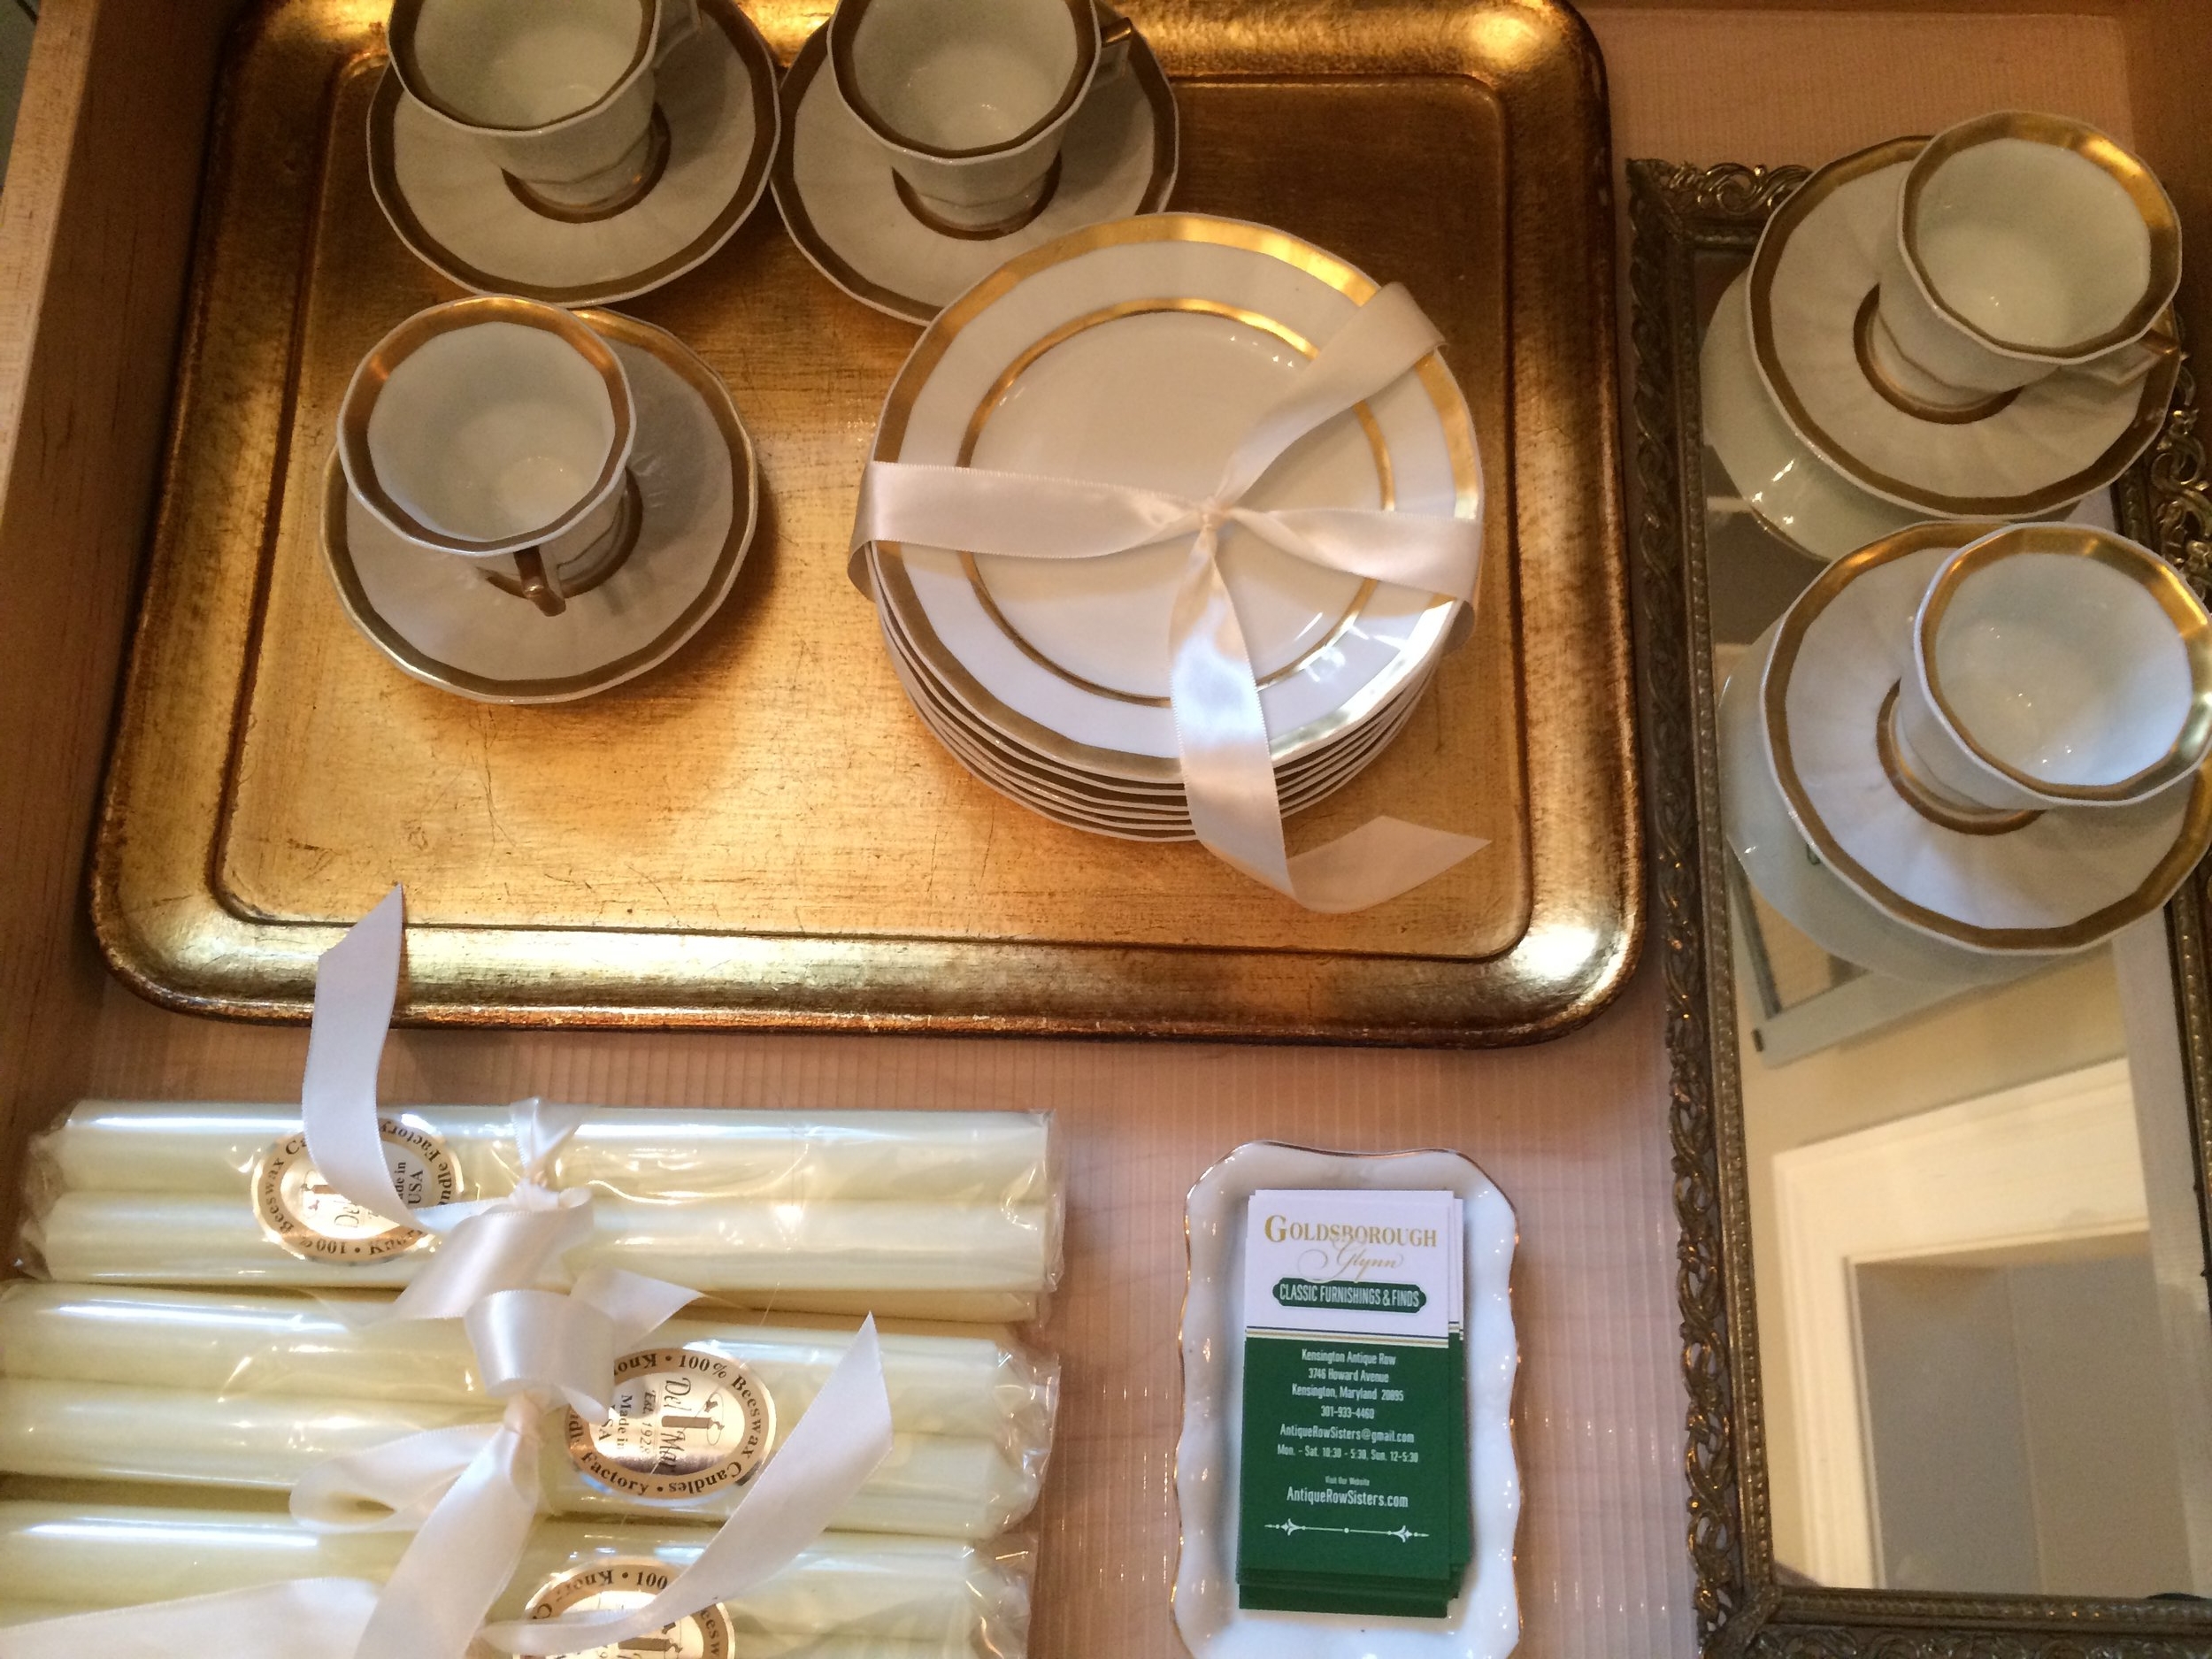 An ivory and gold drawer of limoge cups and saucers and Royal Cierge 100% bees wax candles sticks.